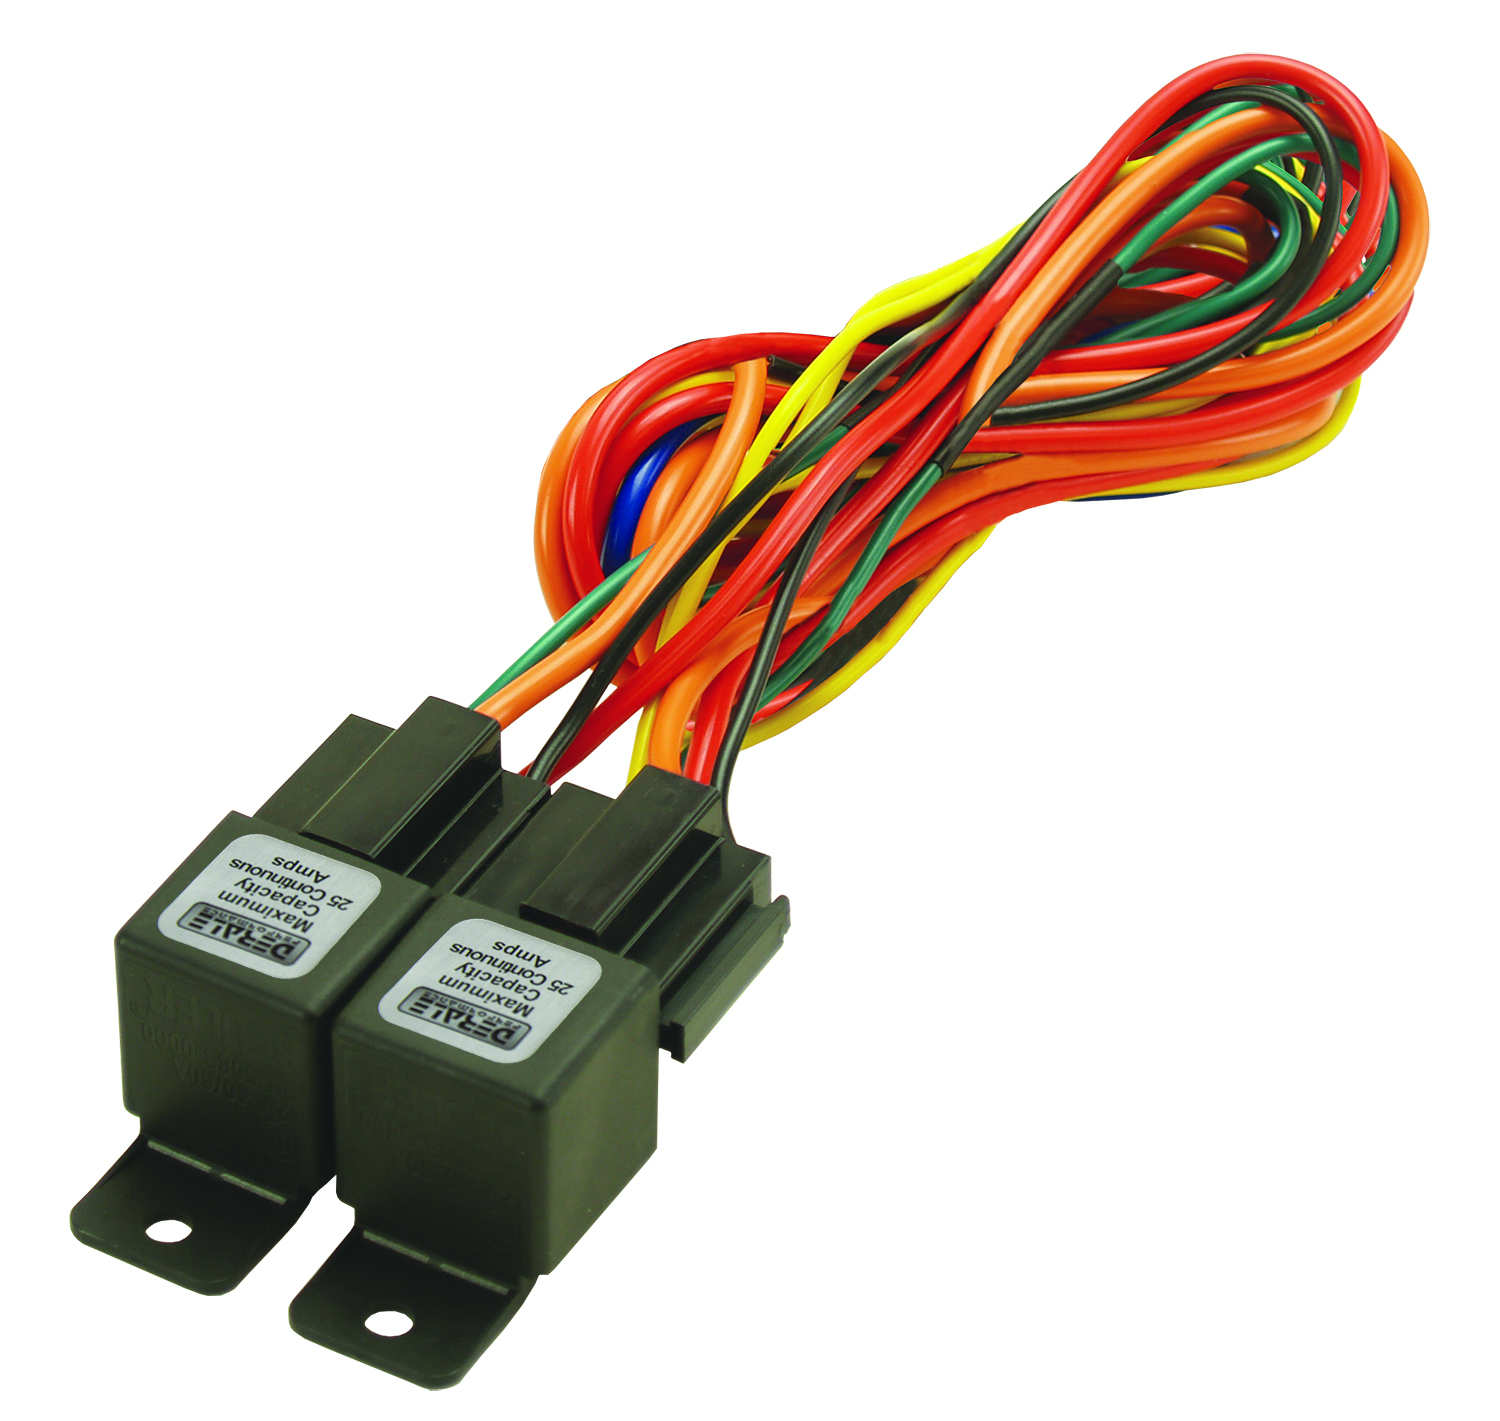 40/60 Amp Dual Relay w/Wiring Harness - 16765